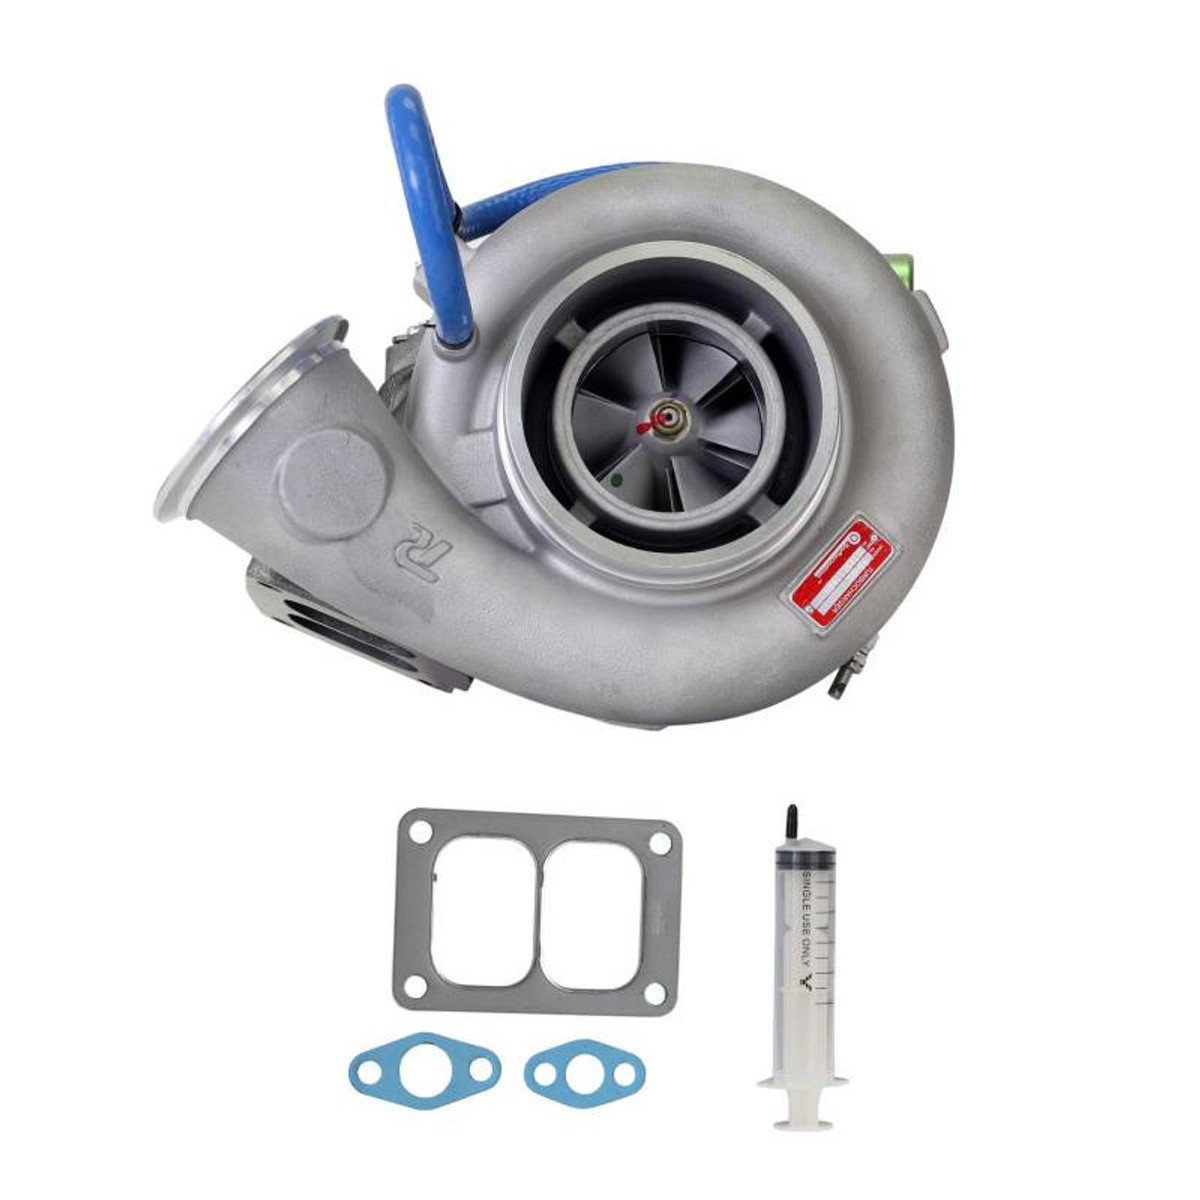 Rotomaster New Turbocharger - 1994-2006 Detroit Diesel Series 60 12.7L A1420102N